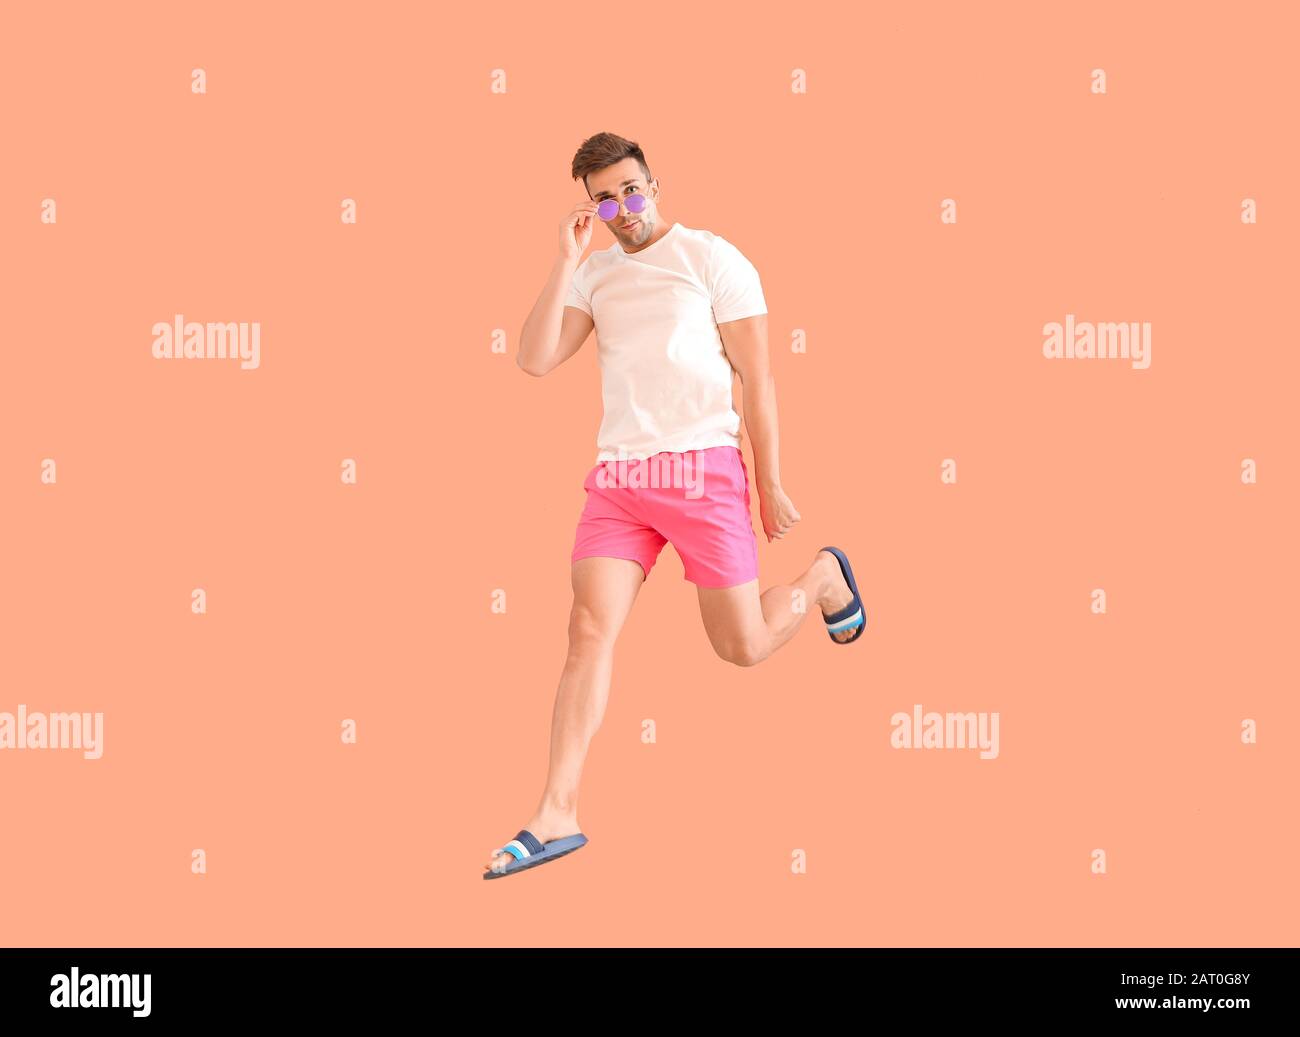 250 Neon pink shorts Stock Pictures, Editorial Images and Stock Photos